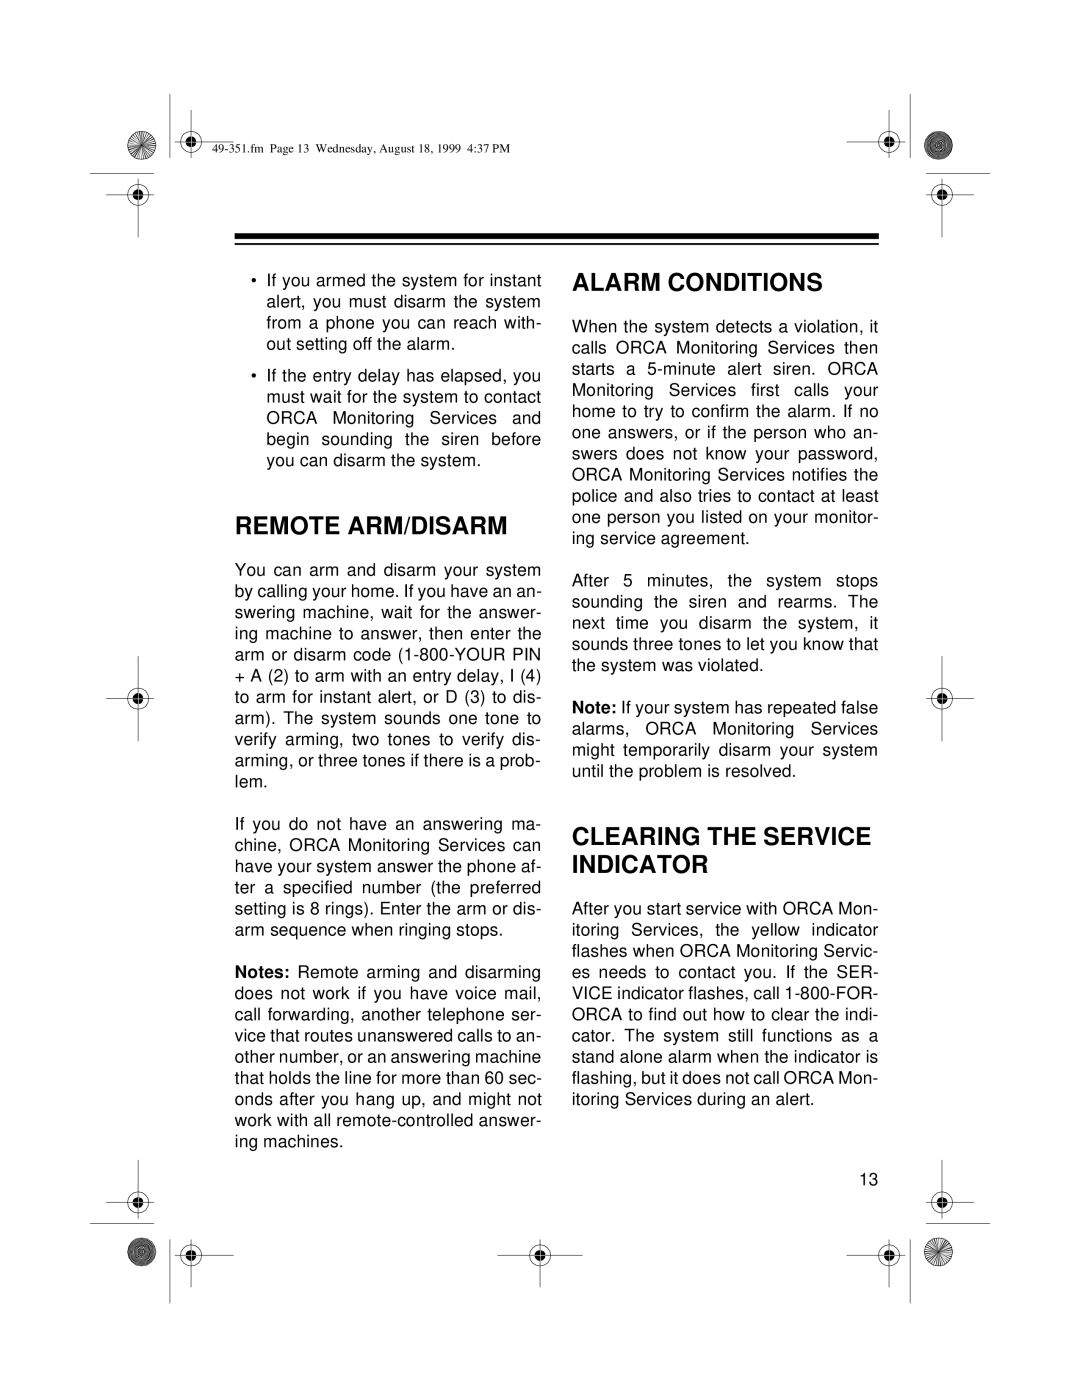 Radio Shack 49-351 owner manual Remote Arm/Disarm, Alarm Conditions, Clearing The Service Indicator 